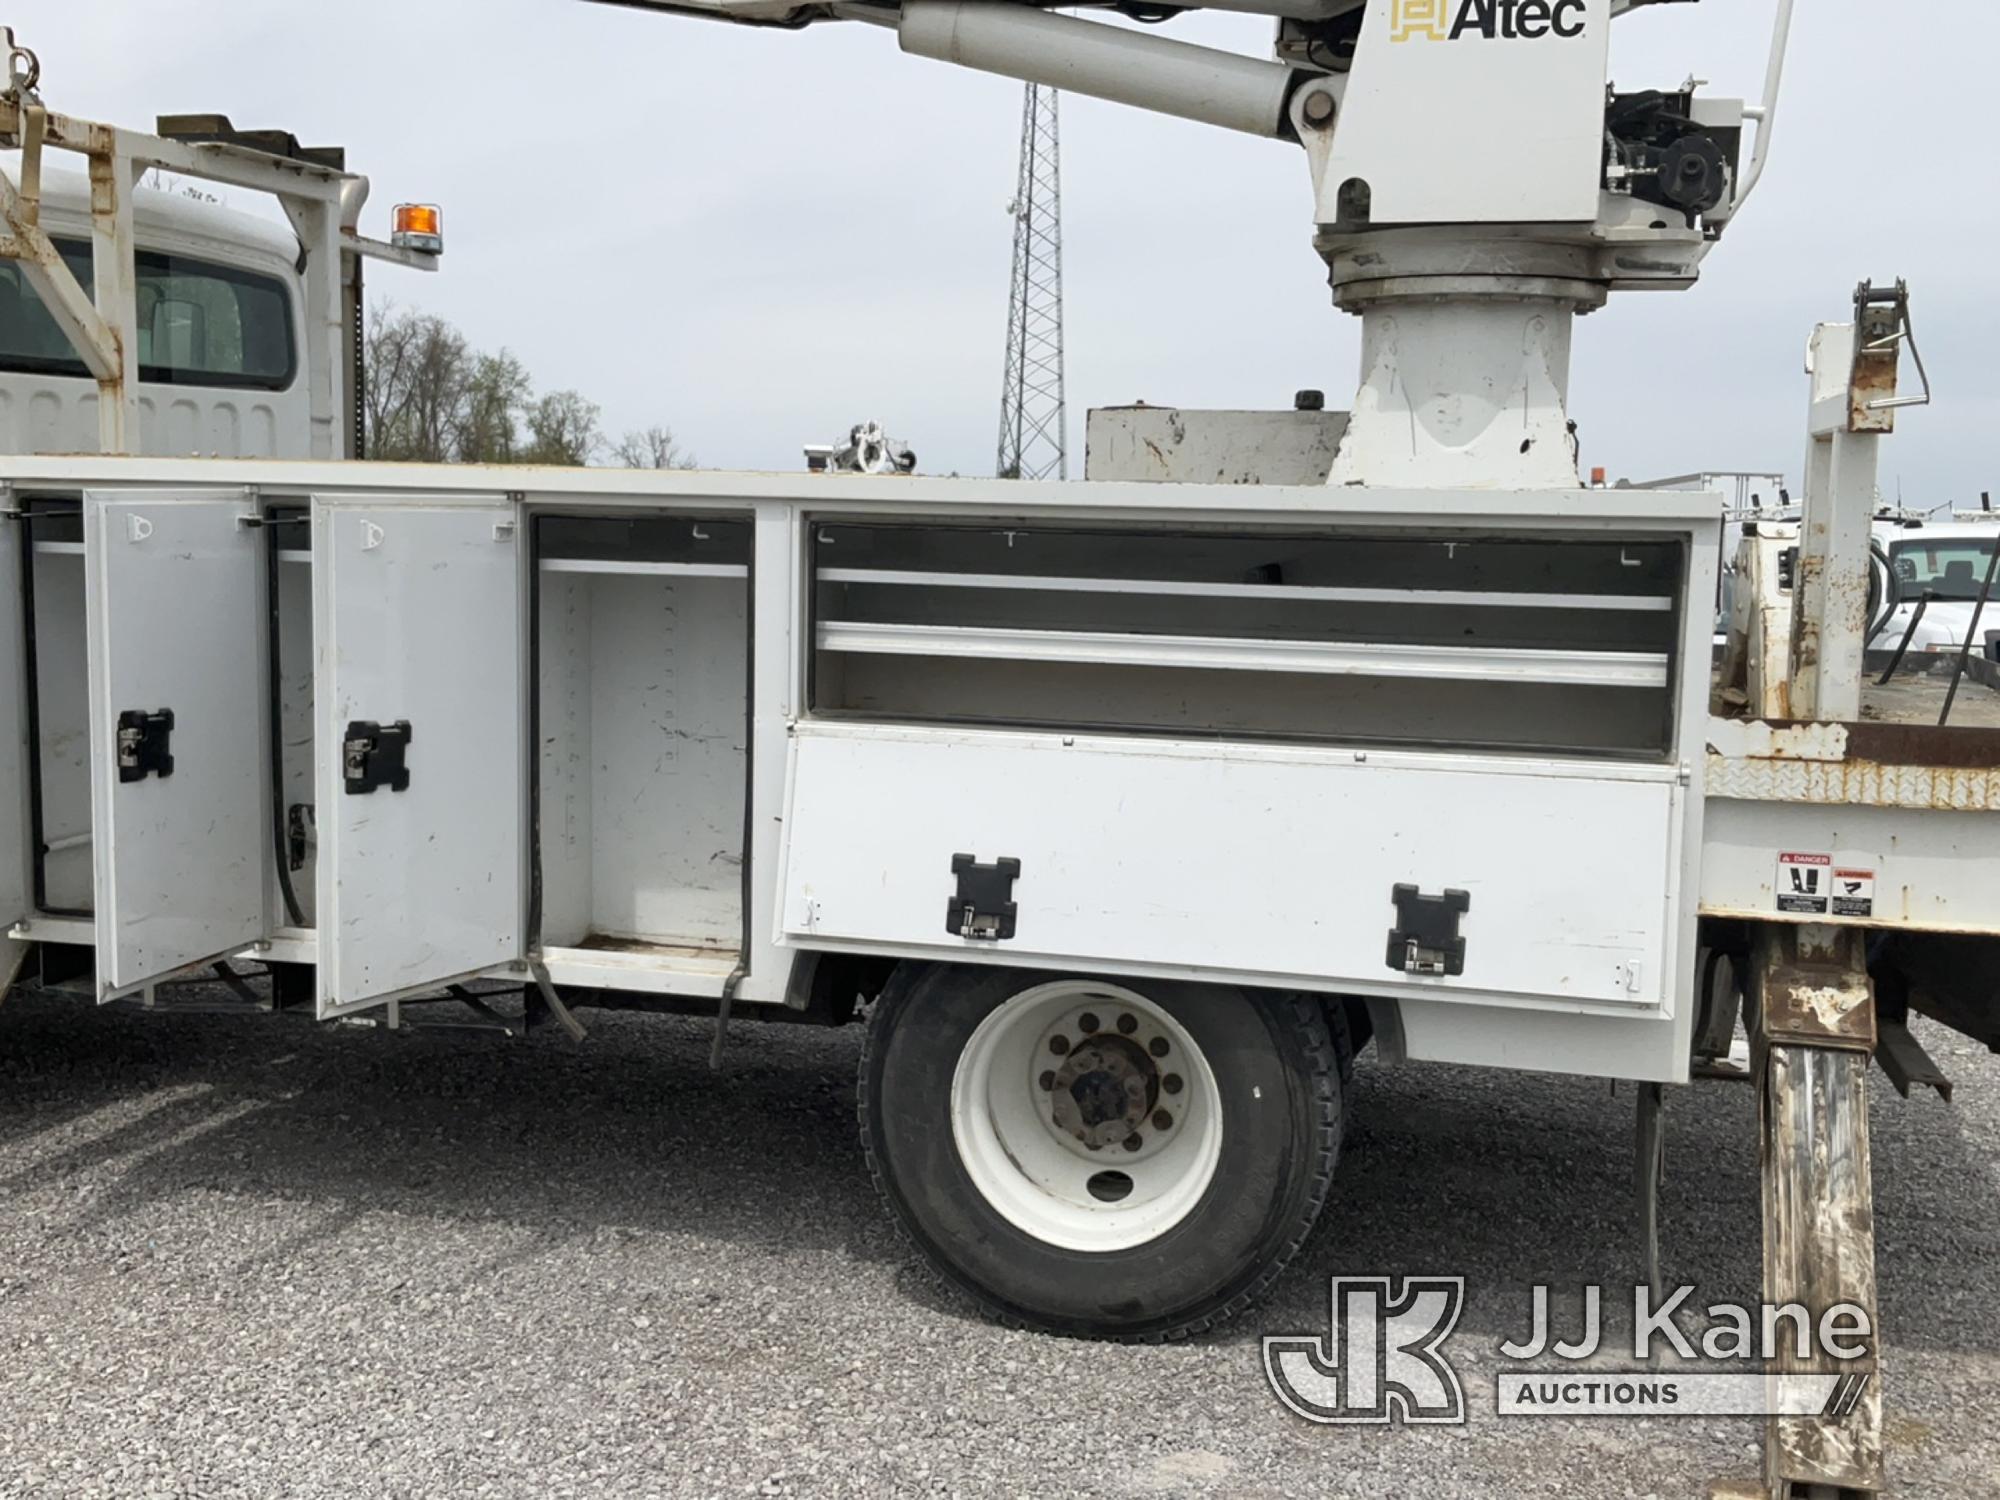 (Verona, KY) Altec DC47-TR, Digger Derrick rear mounted on 2016 Freightliner M2 106 4x4 Utility Truc